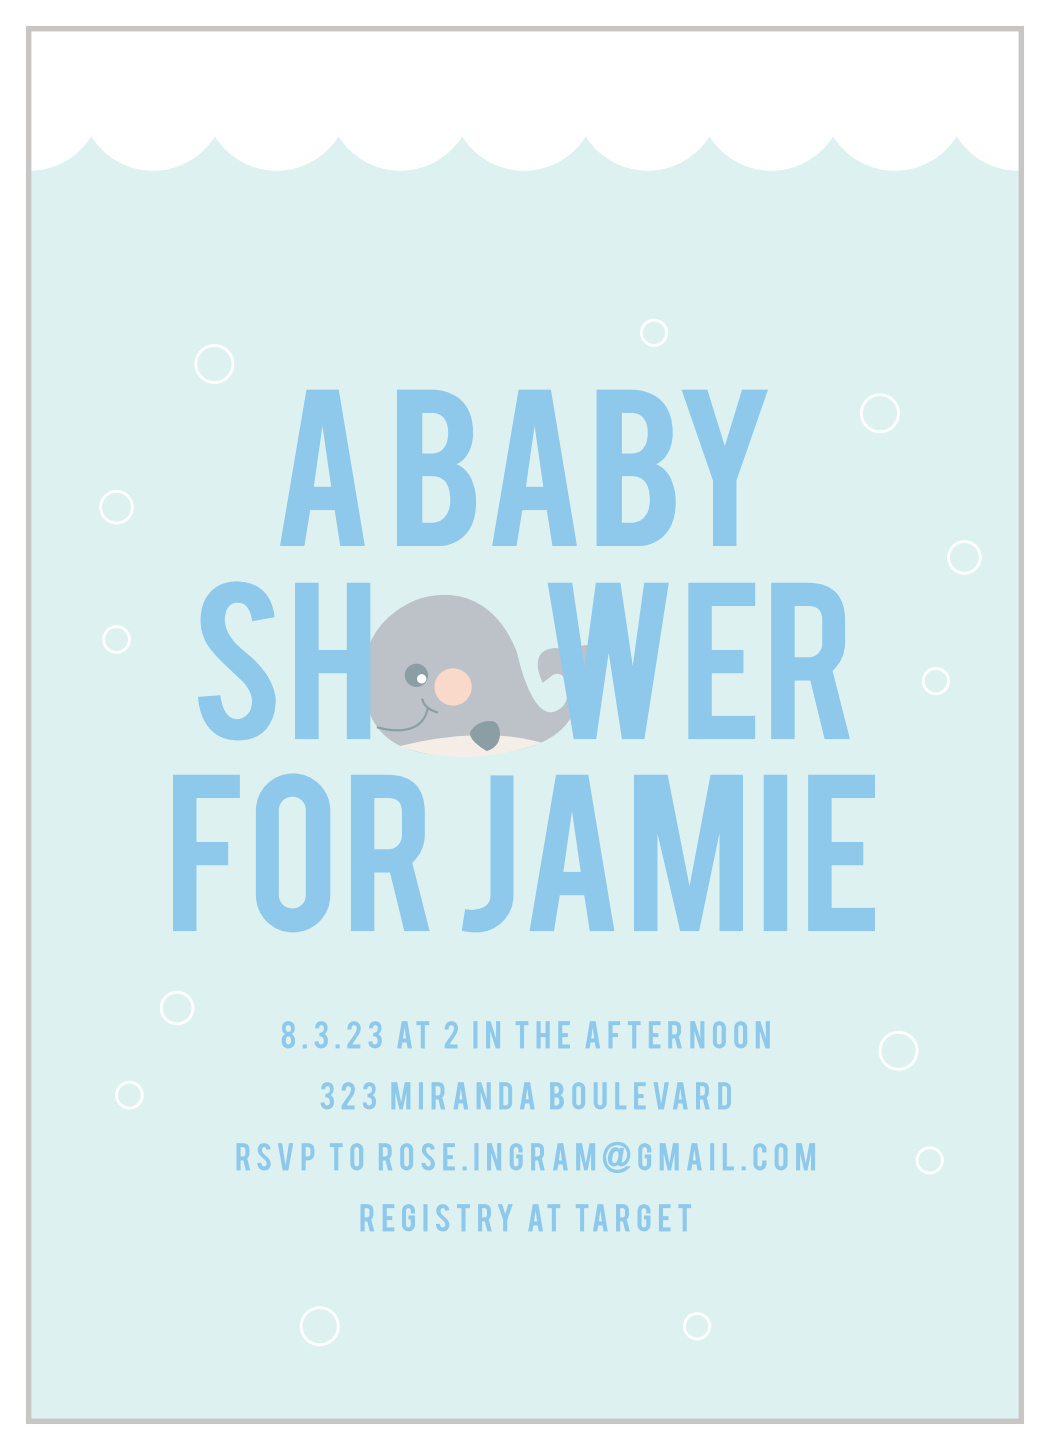 Baby Whale Baby Shower Invitations